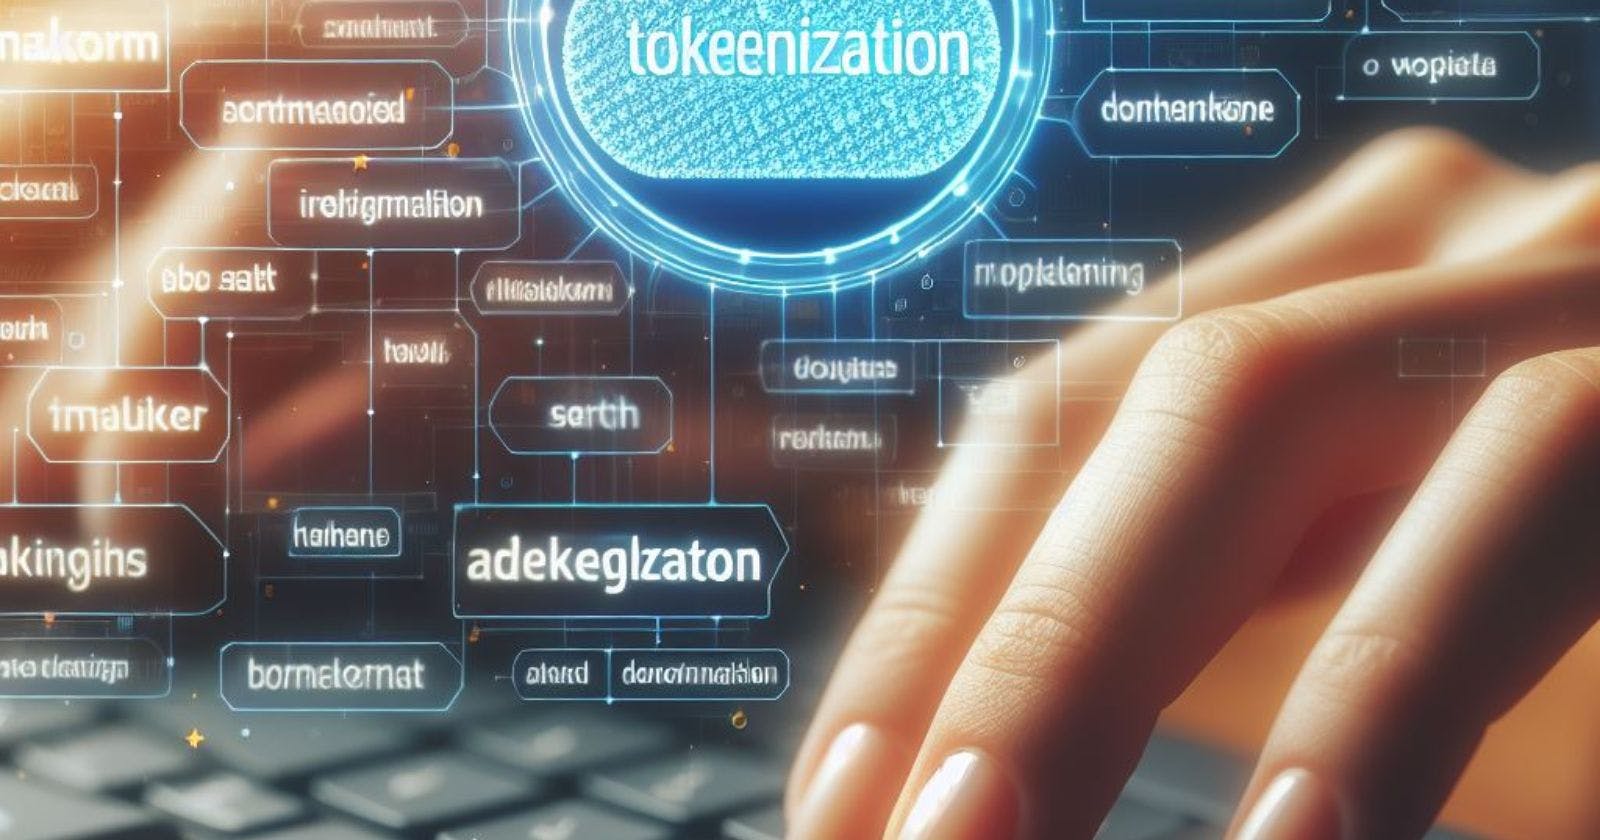 How Does Tokenization Work?